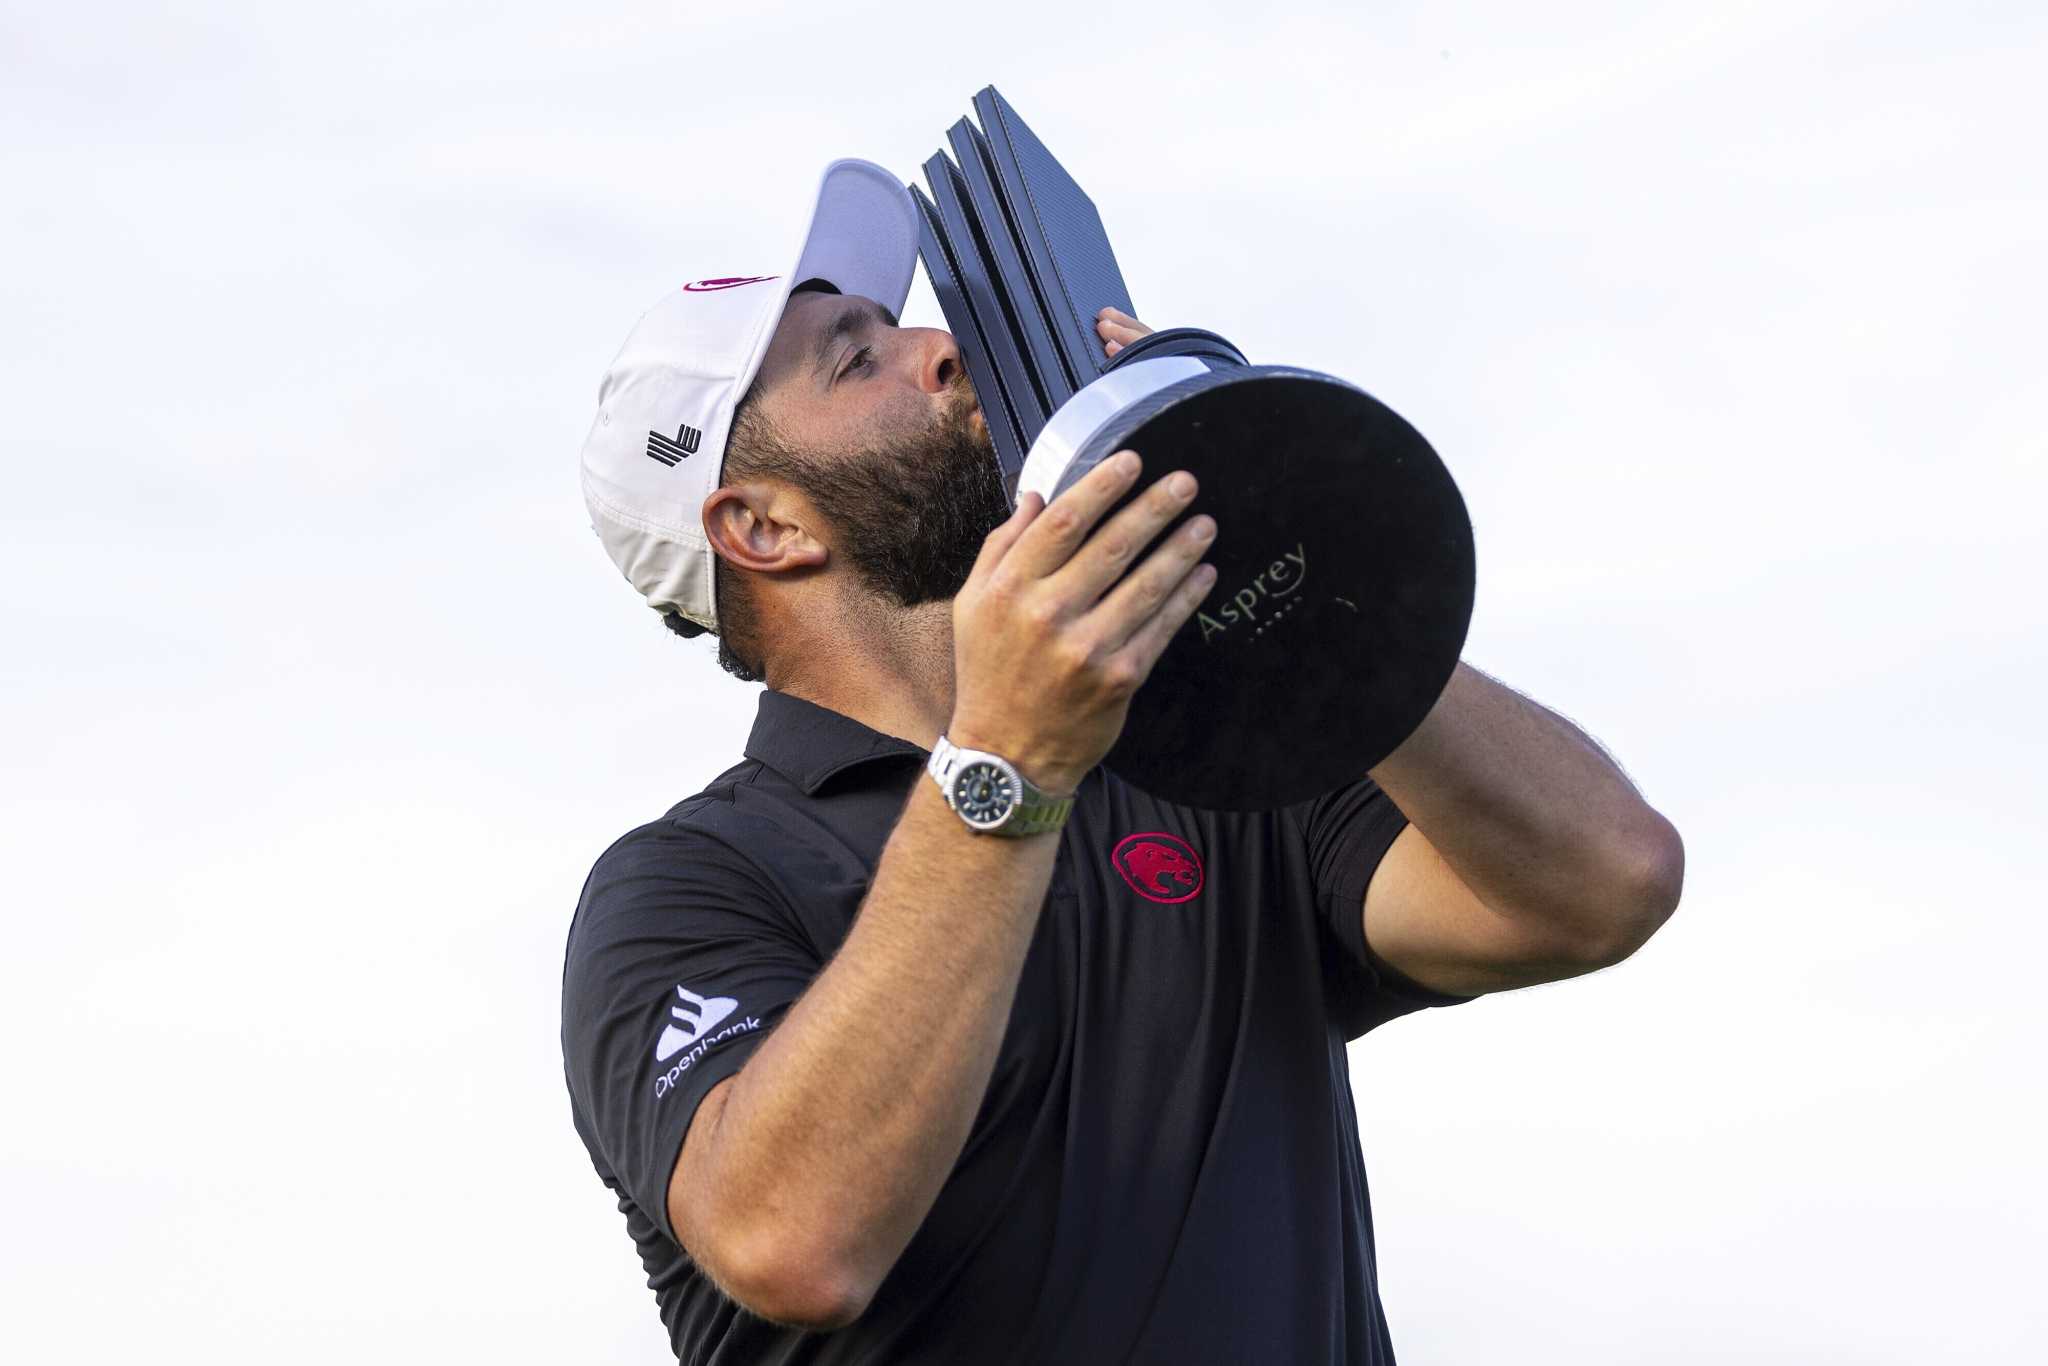 Jon Rahm wins LIV Golf UK for his 1st victory on the Saudi-funded tour